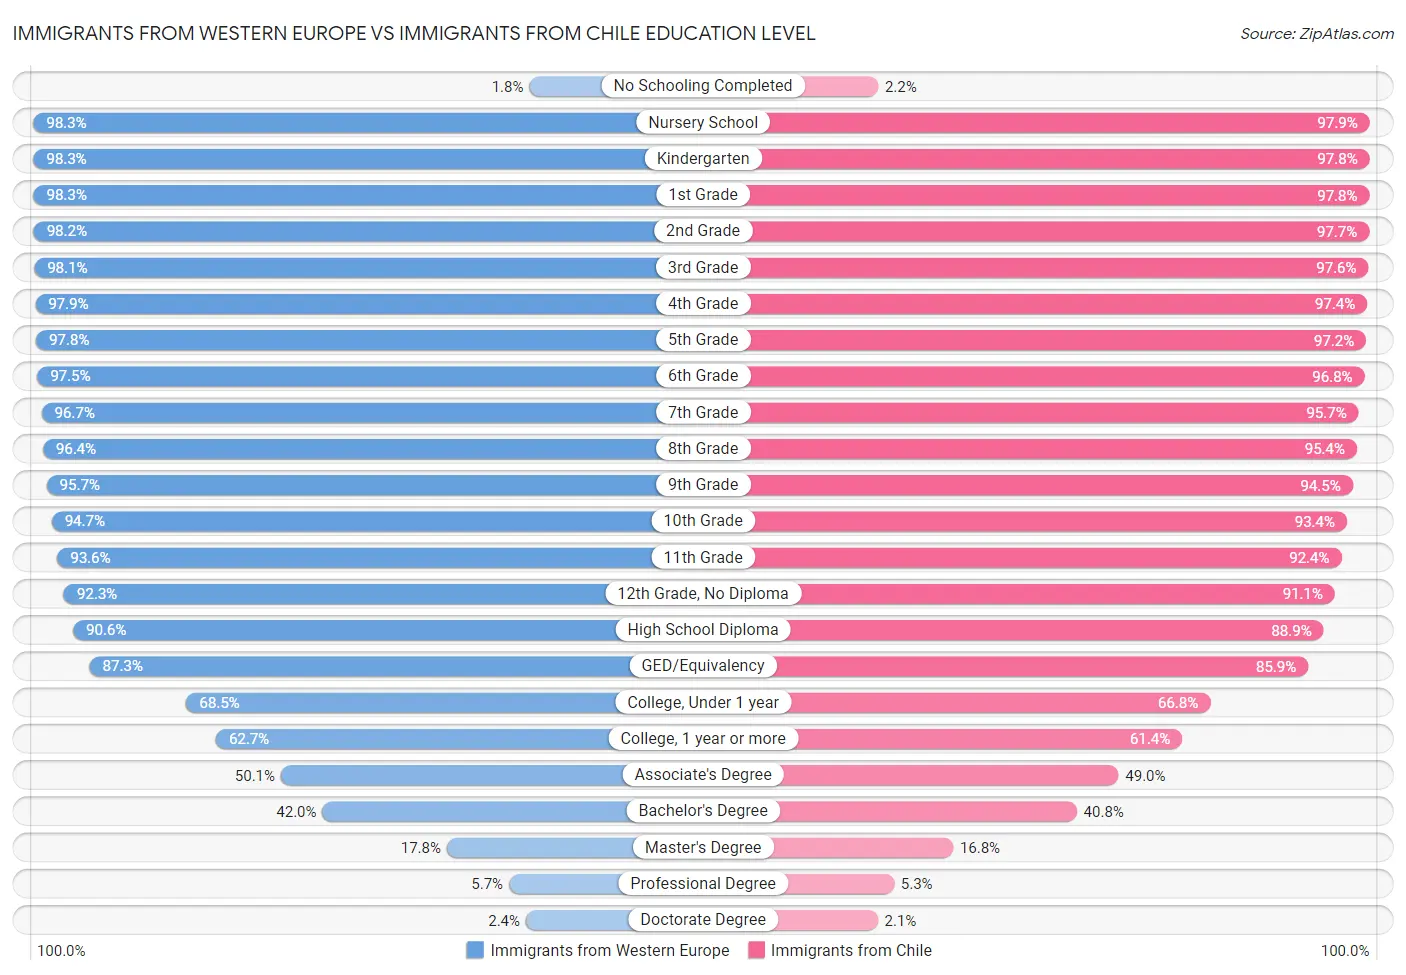 Immigrants from Western Europe vs Immigrants from Chile Education Level